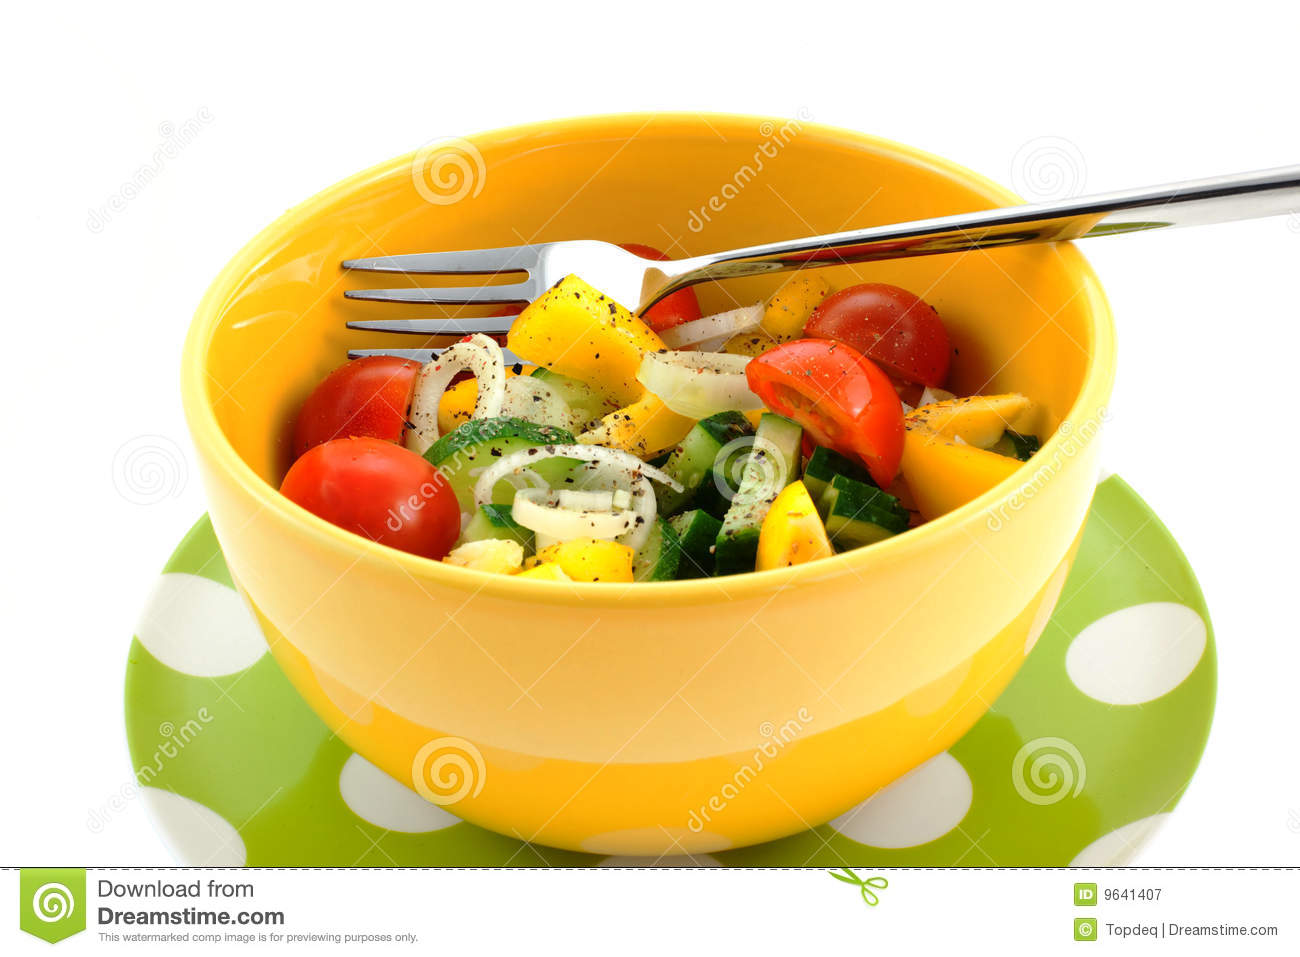 Free Stock Photography  Vegetable Salad In A Yellow Bowl And Fork